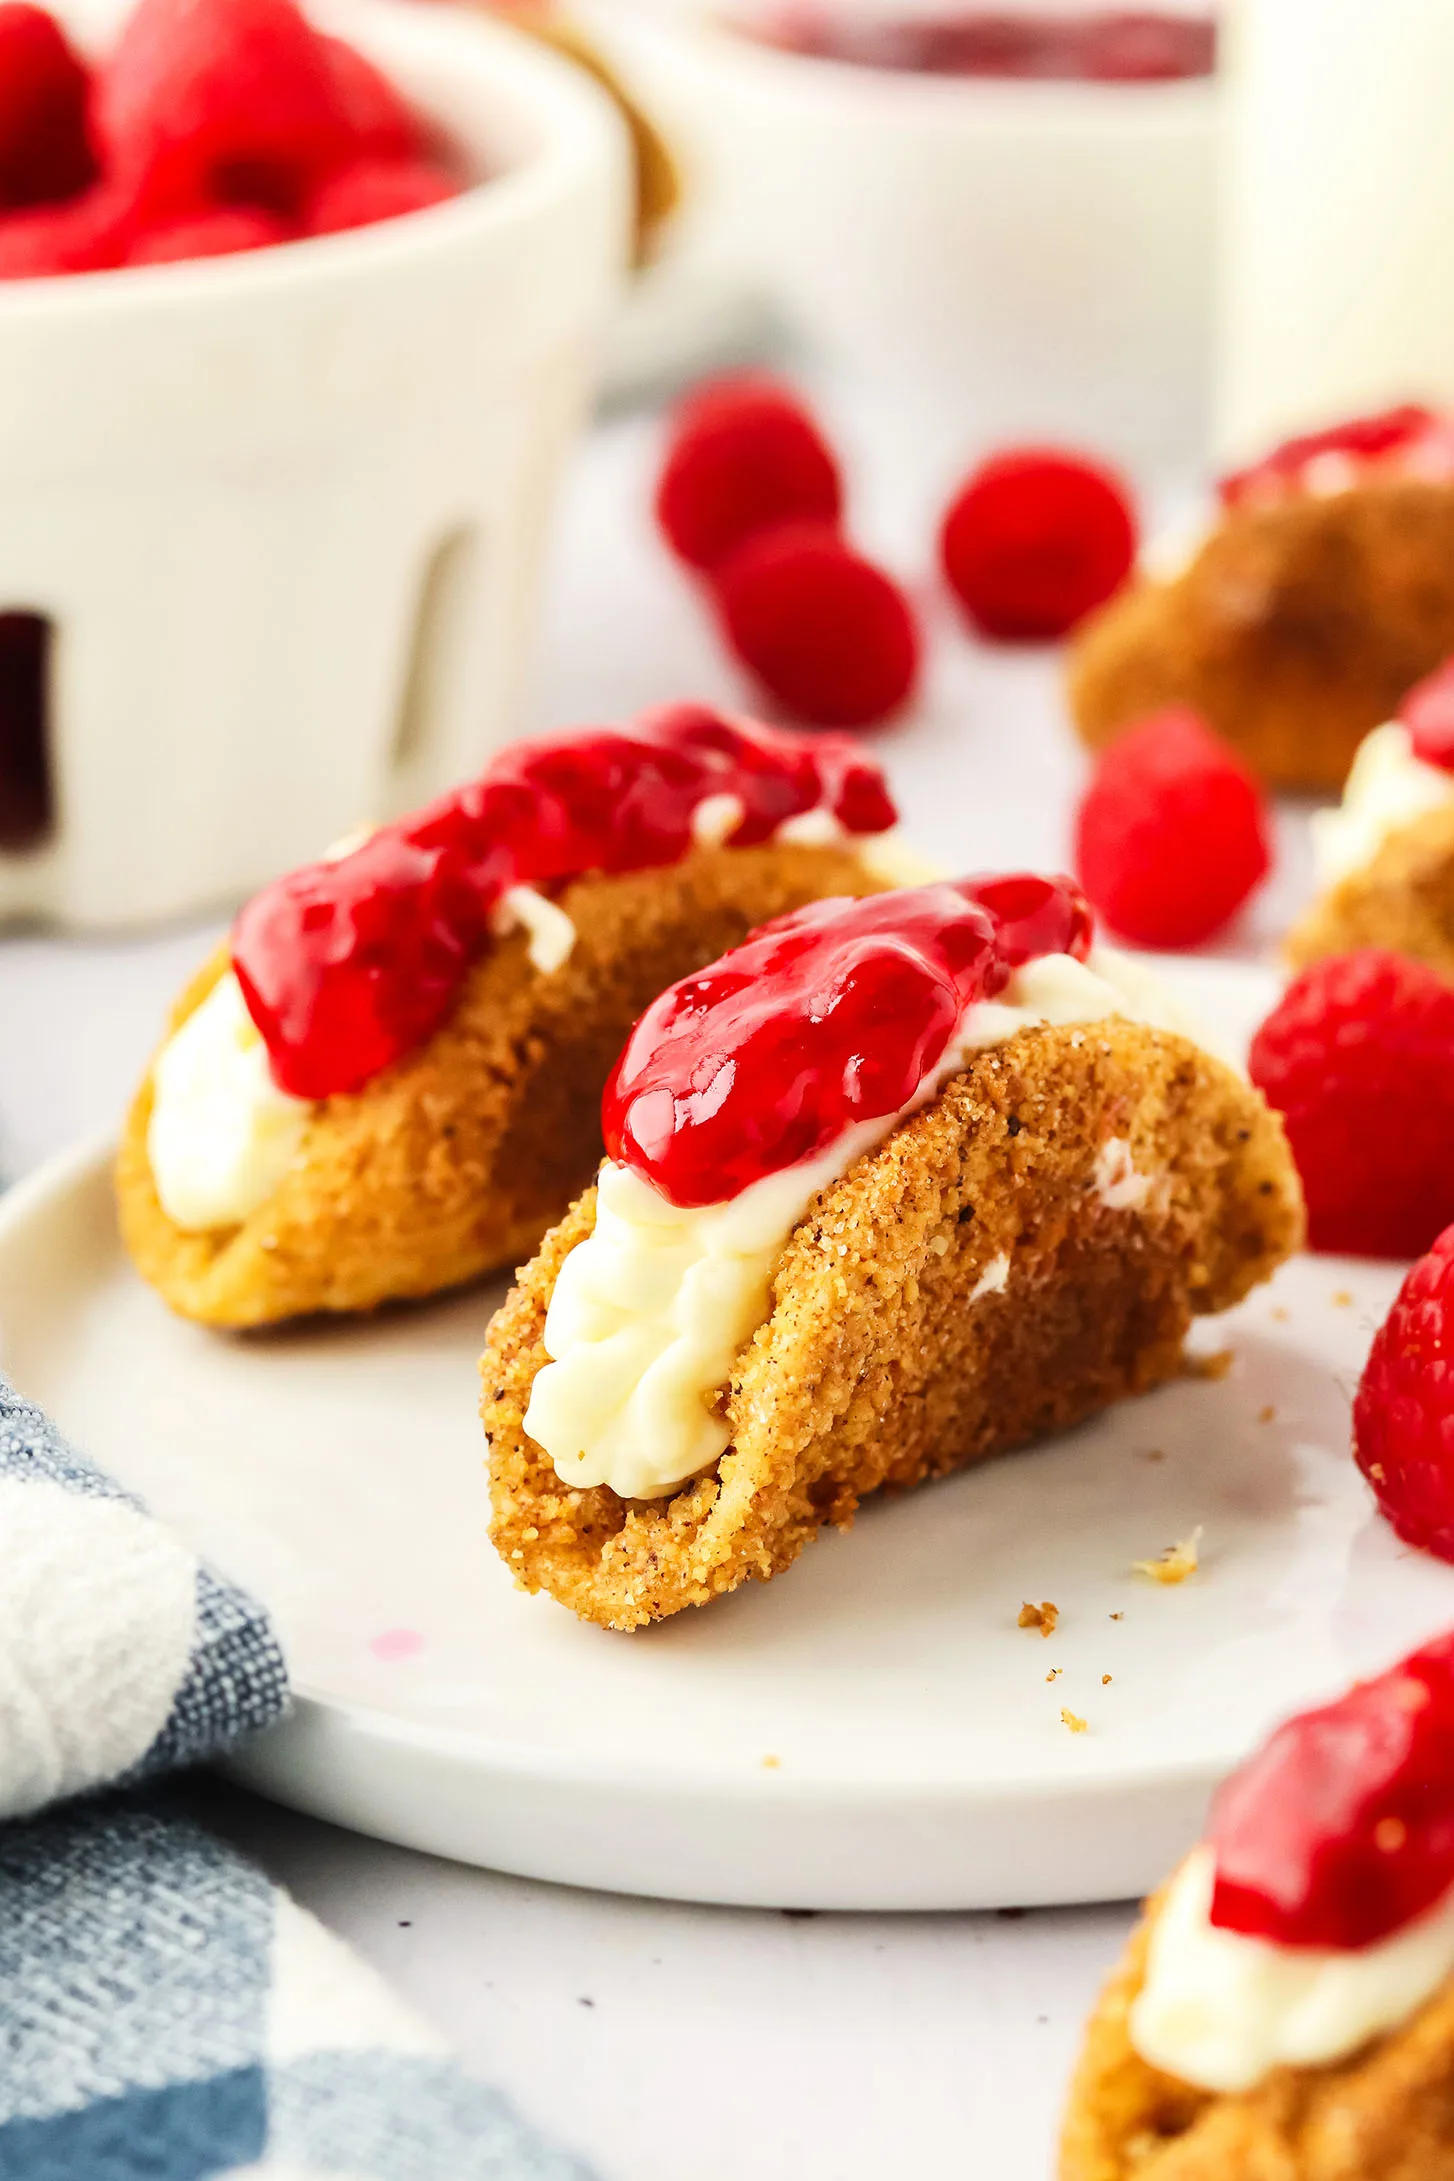 cheesecake tacos on a plate surrounded by fresh raspberries and a blue and white napkin